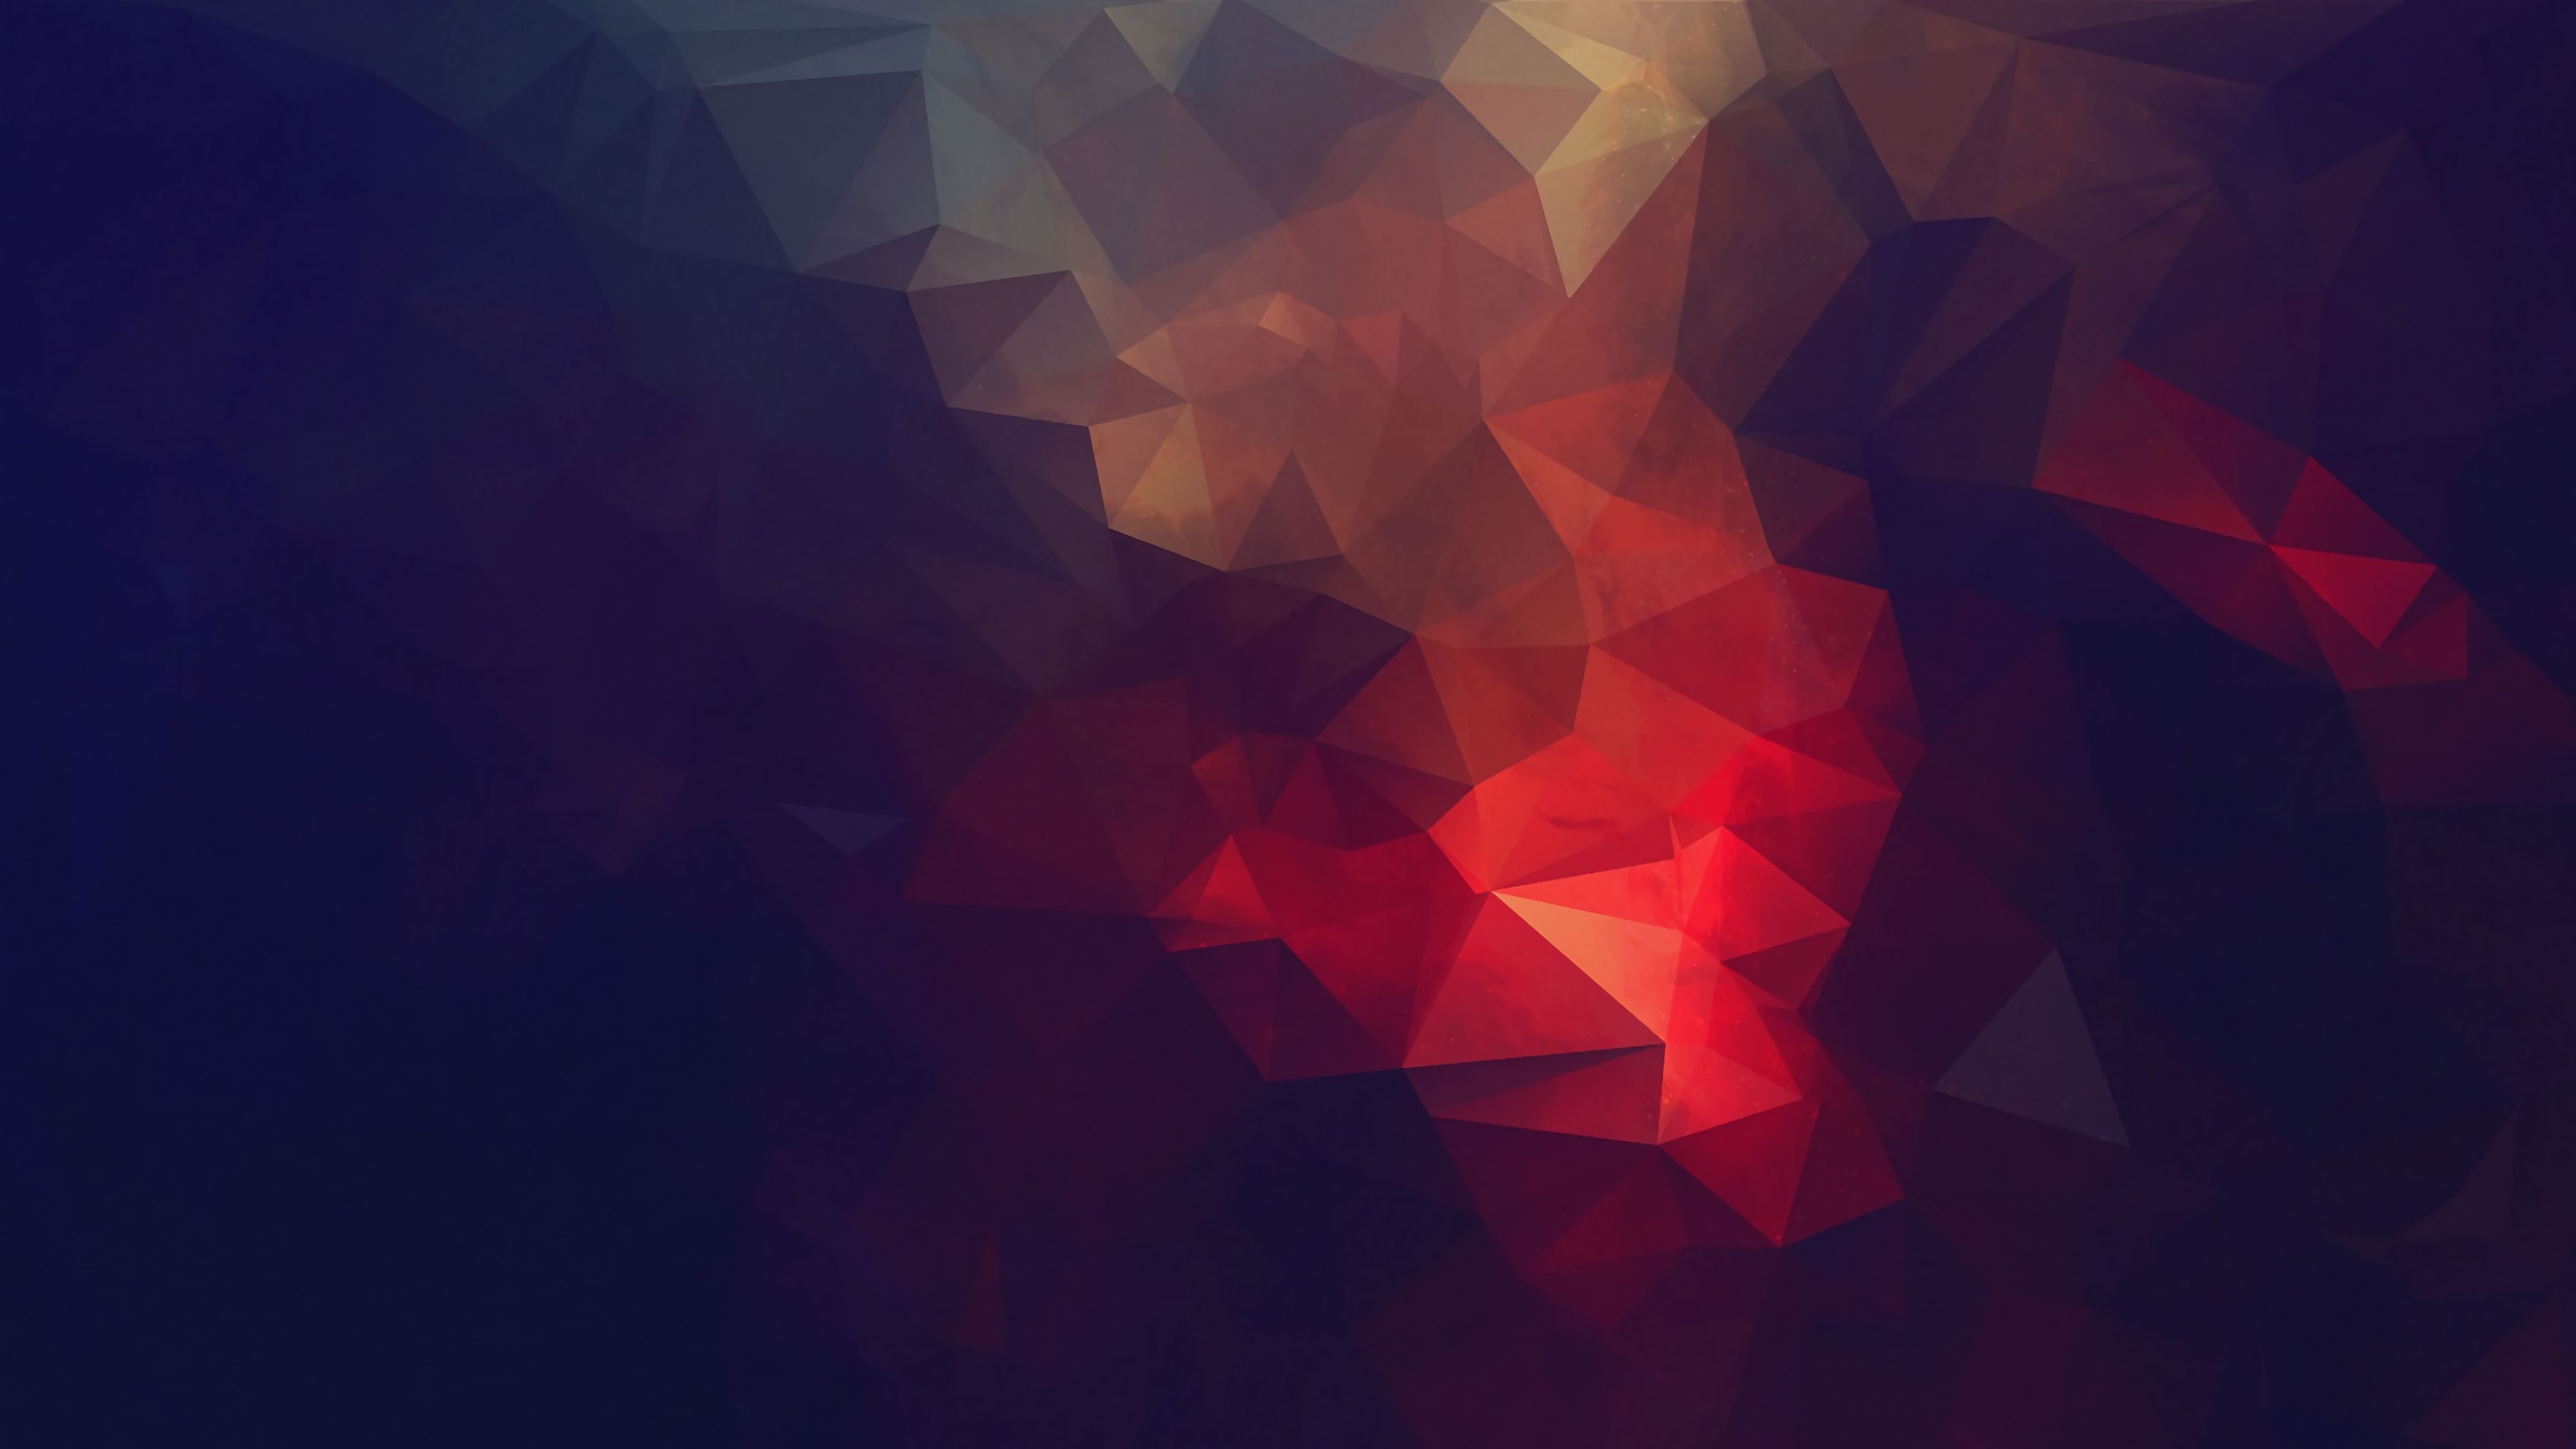 Free Abstract wallpaper with geometric shapes template